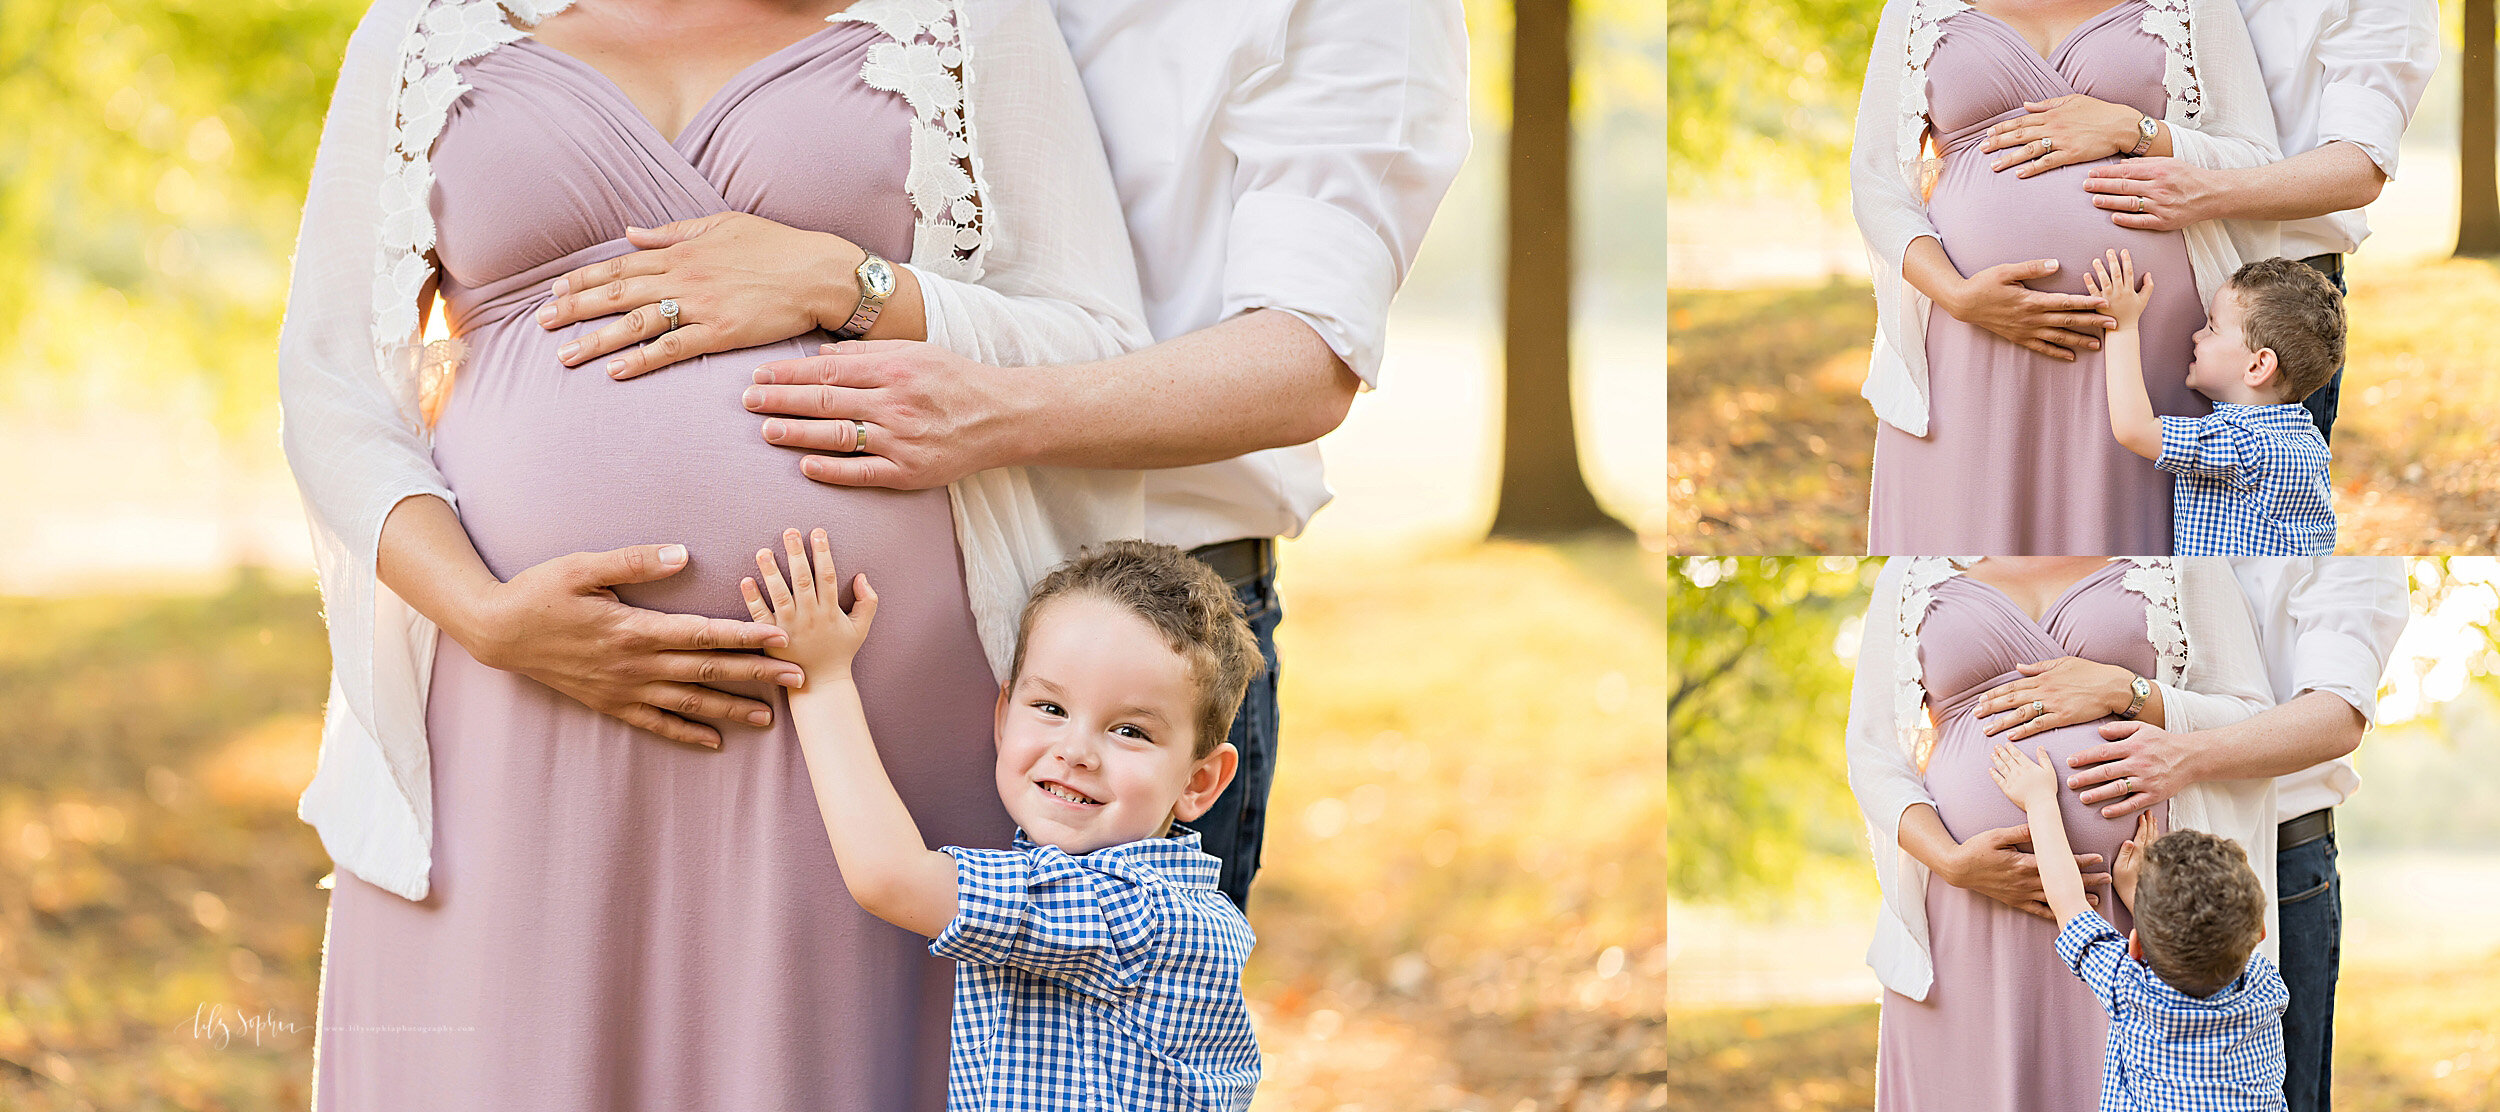  Collage photo of a family of three in an Atlanta park as they caress their infant in the womb and wait expectantly for the arrival of their child taken in natural light at sunset. 